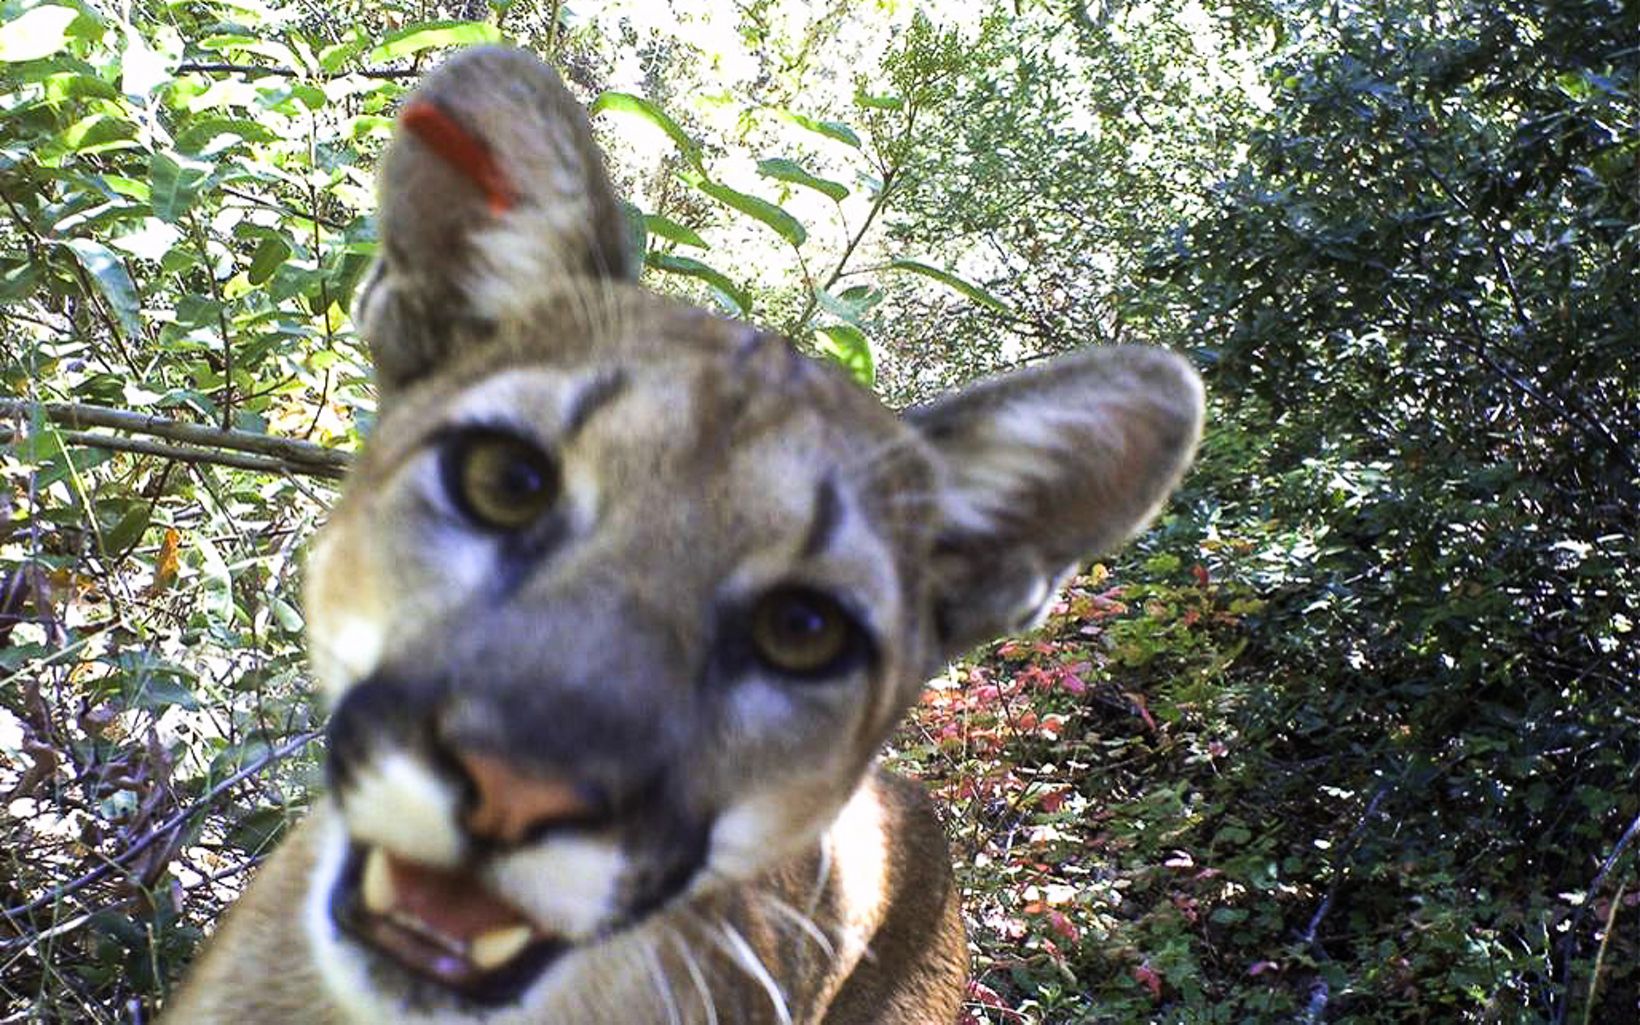 A close up, slightly blurry camera trap photo of a mountain lion